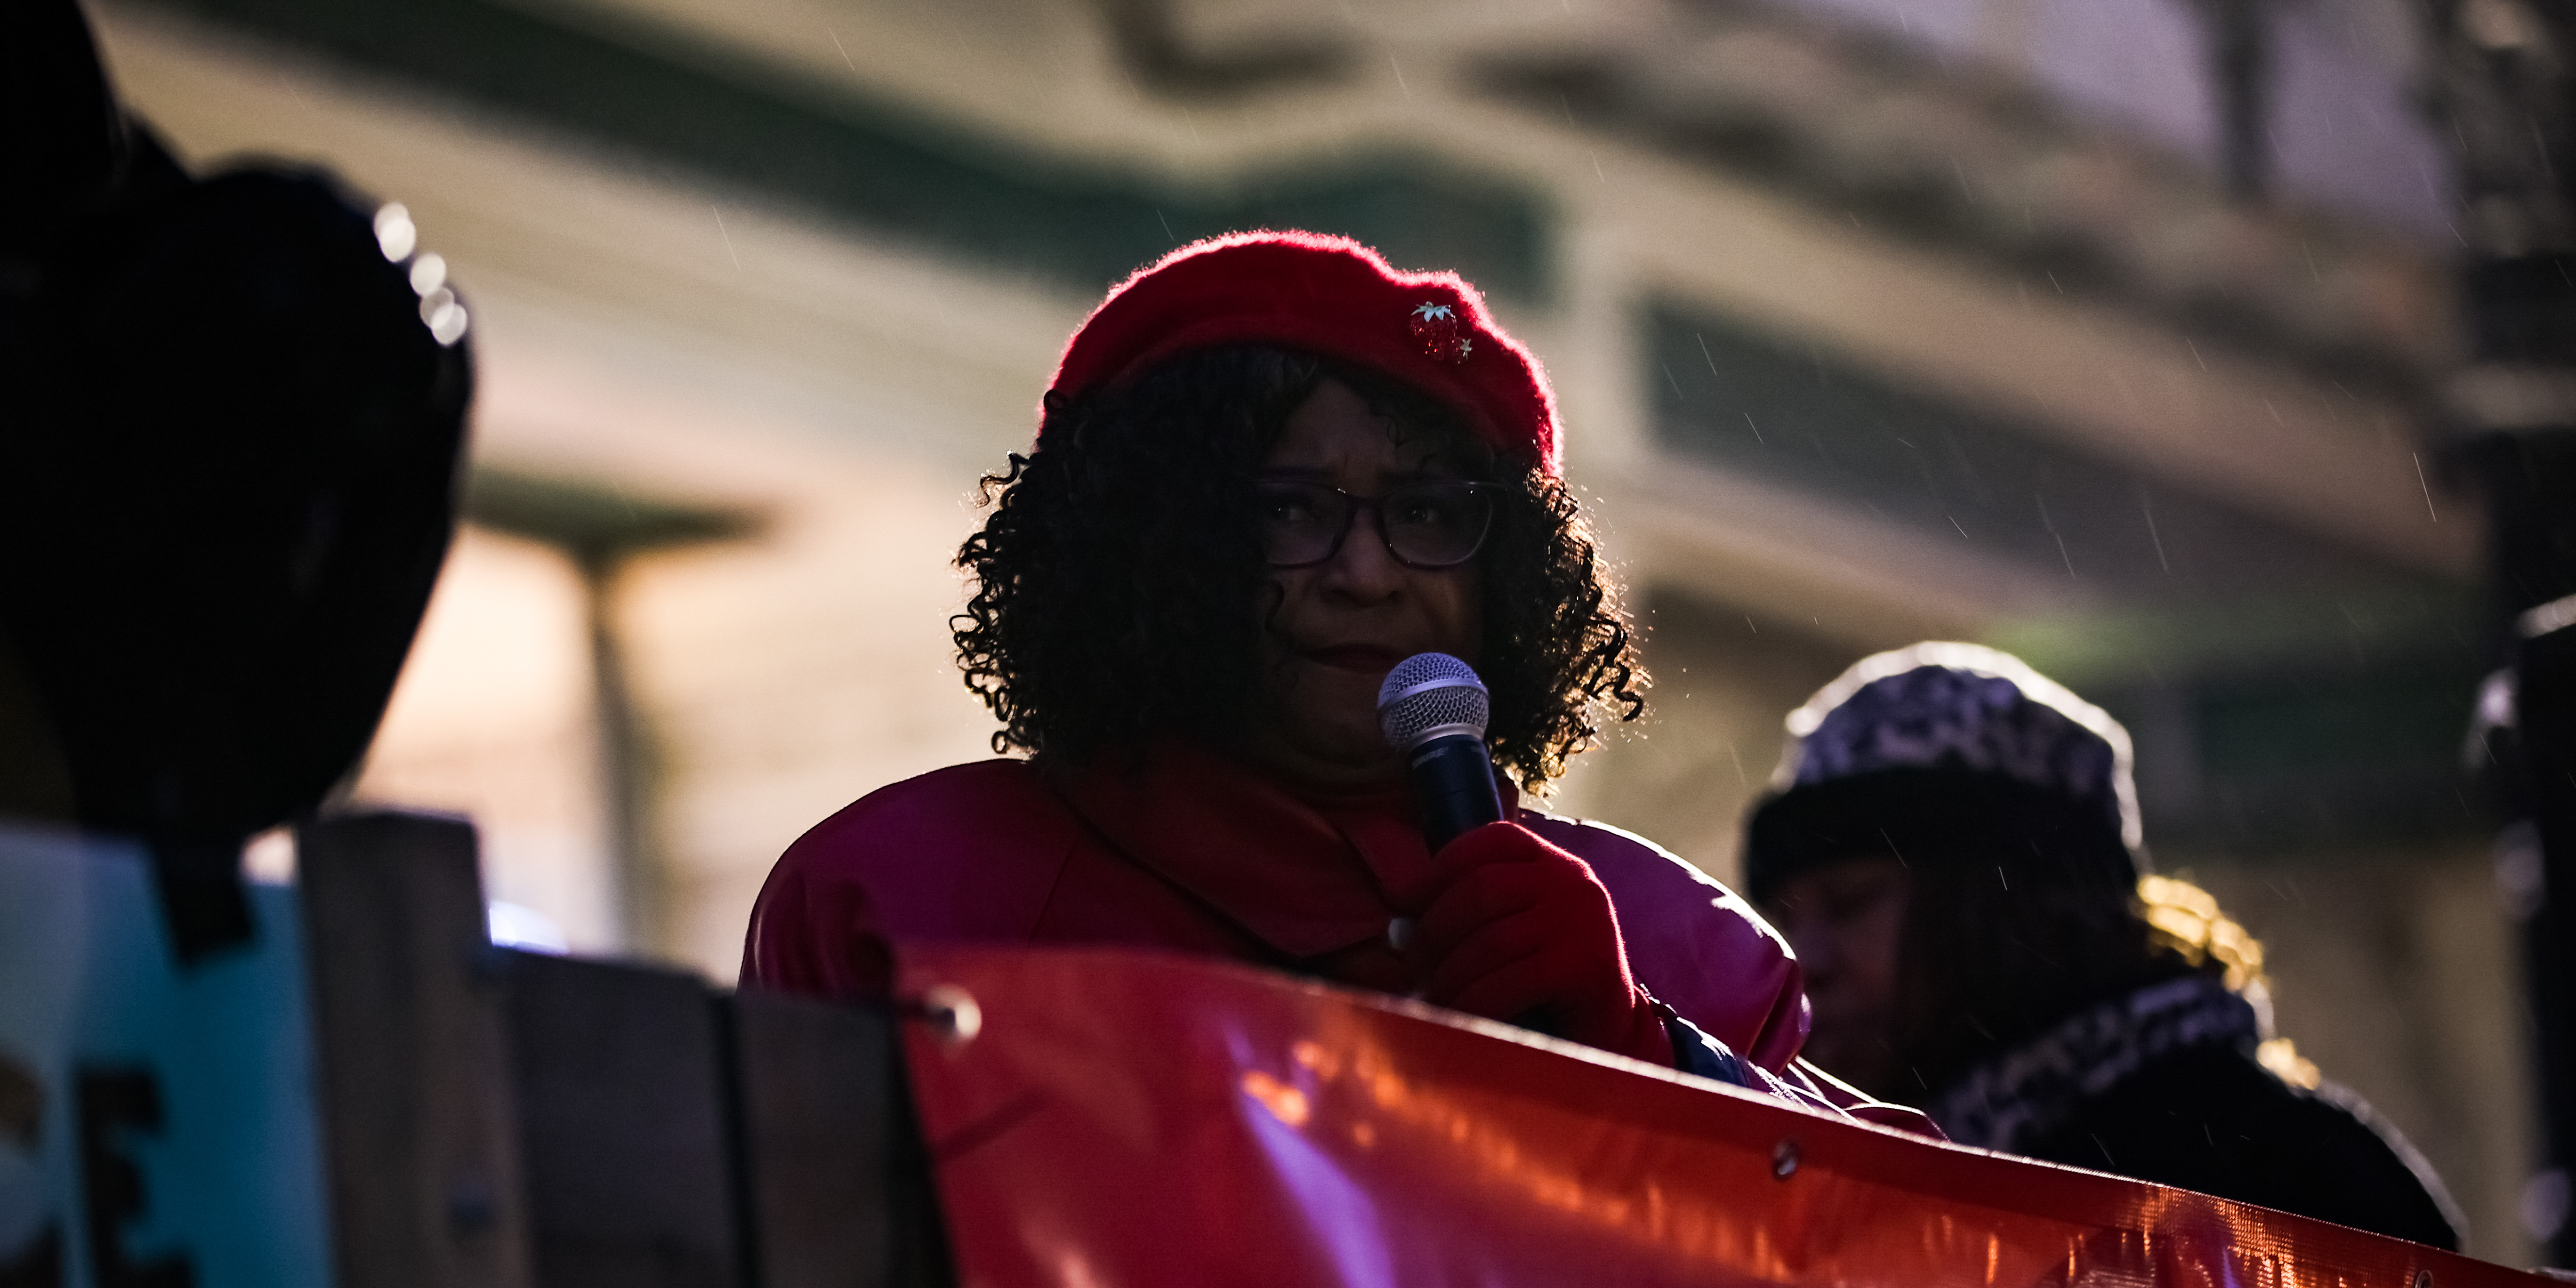 OAKLAND, CA - JANUARY 29: Alameda district attorney Pamela Price speaks during a protest of a thousand of people at the Oscar Grant Plaza over Tyre Nichols killing by Memphis police, in Oakland, California, United States on January 29, 2023. (Photo by Tayfun Coskun/Anadolu Agency via Getty Images)